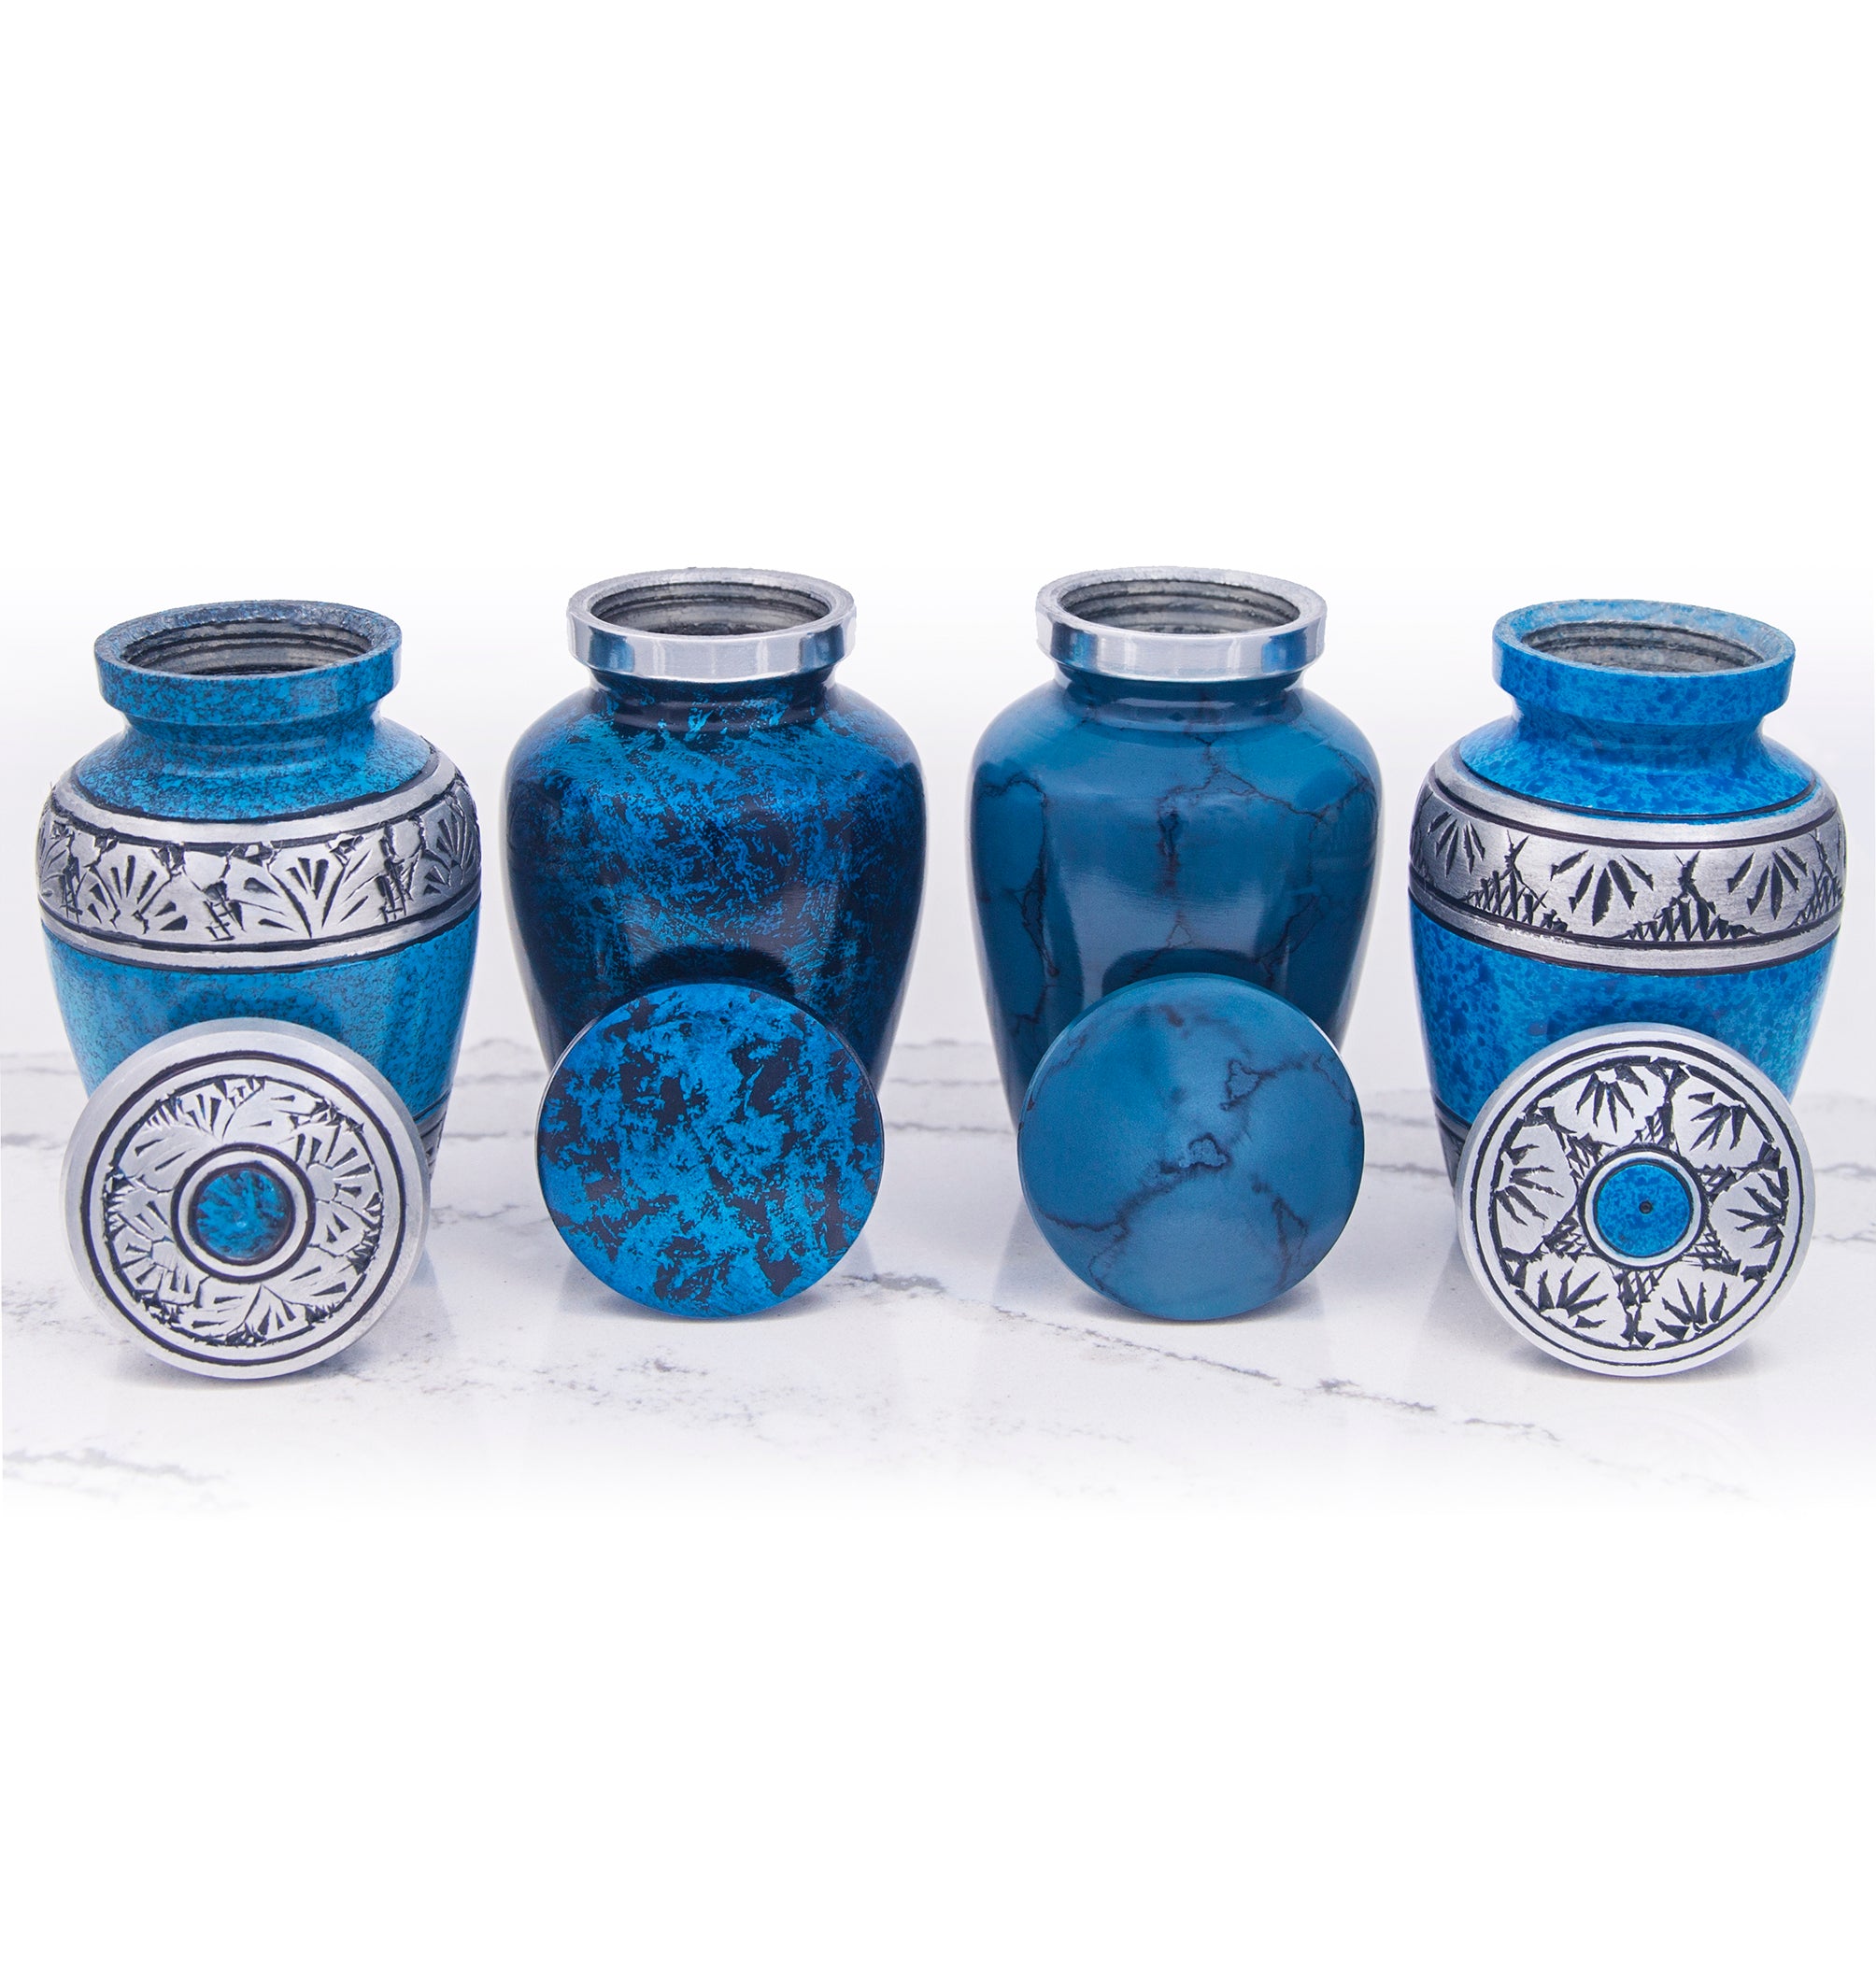 SMALL KEEPSAKE URN COLLECTION - 4 SHADES OF BLUE - SET OF 4